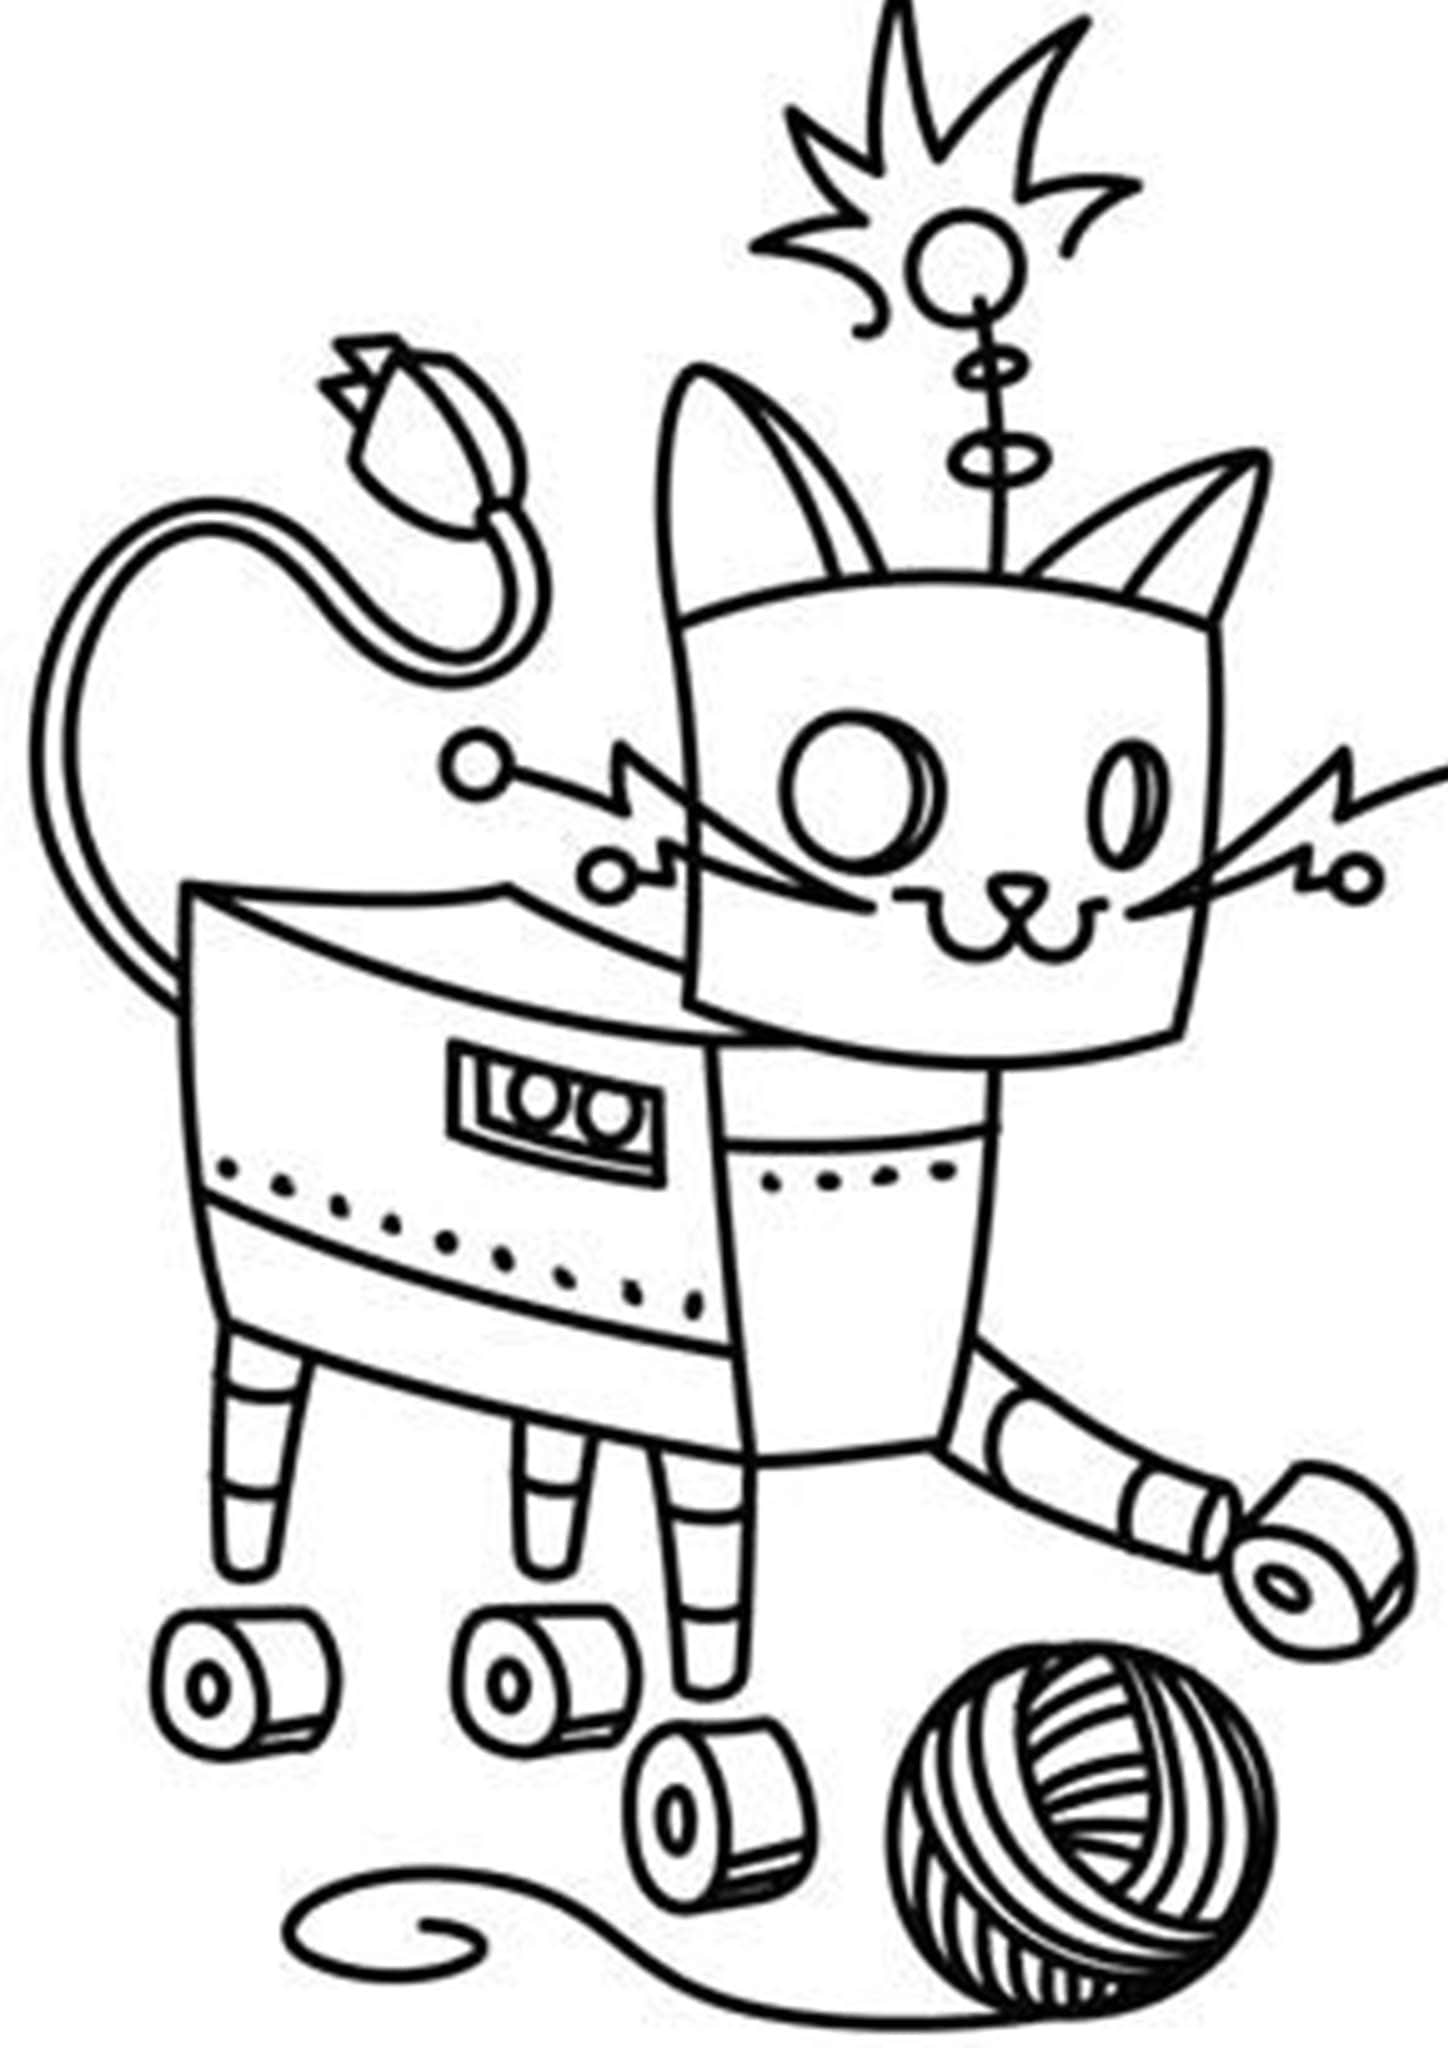 Download Free & Easy To Print Robot Coloring Pages - Tulamama